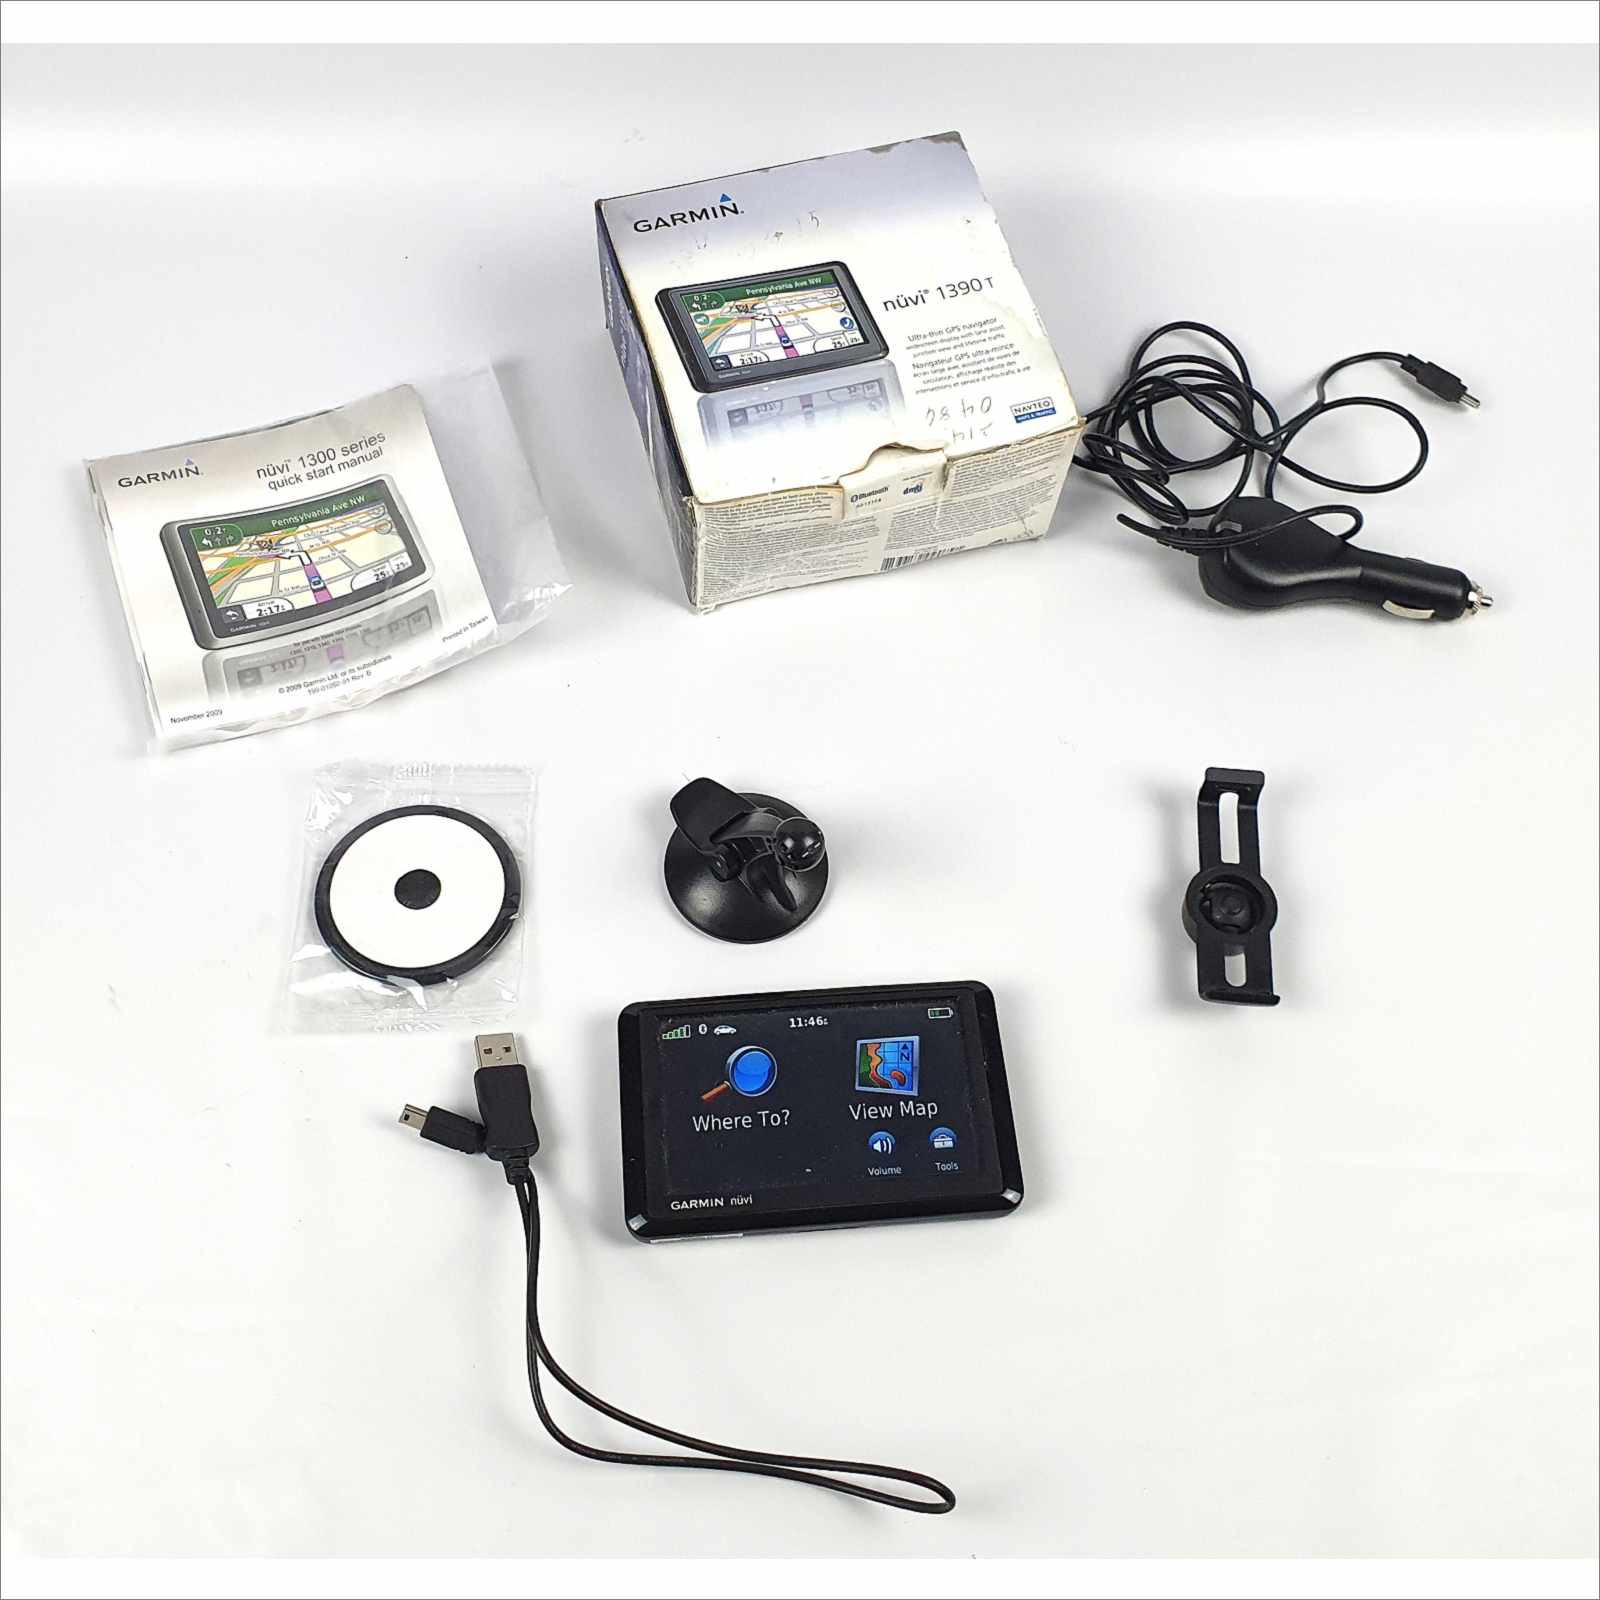 Garmin nüvi 1390T Portable Vehicle GPS With Dash Kit Touchscreen System Lifetime Maps Complete - Computer | Network | Telecom | Lab & medical Equipment